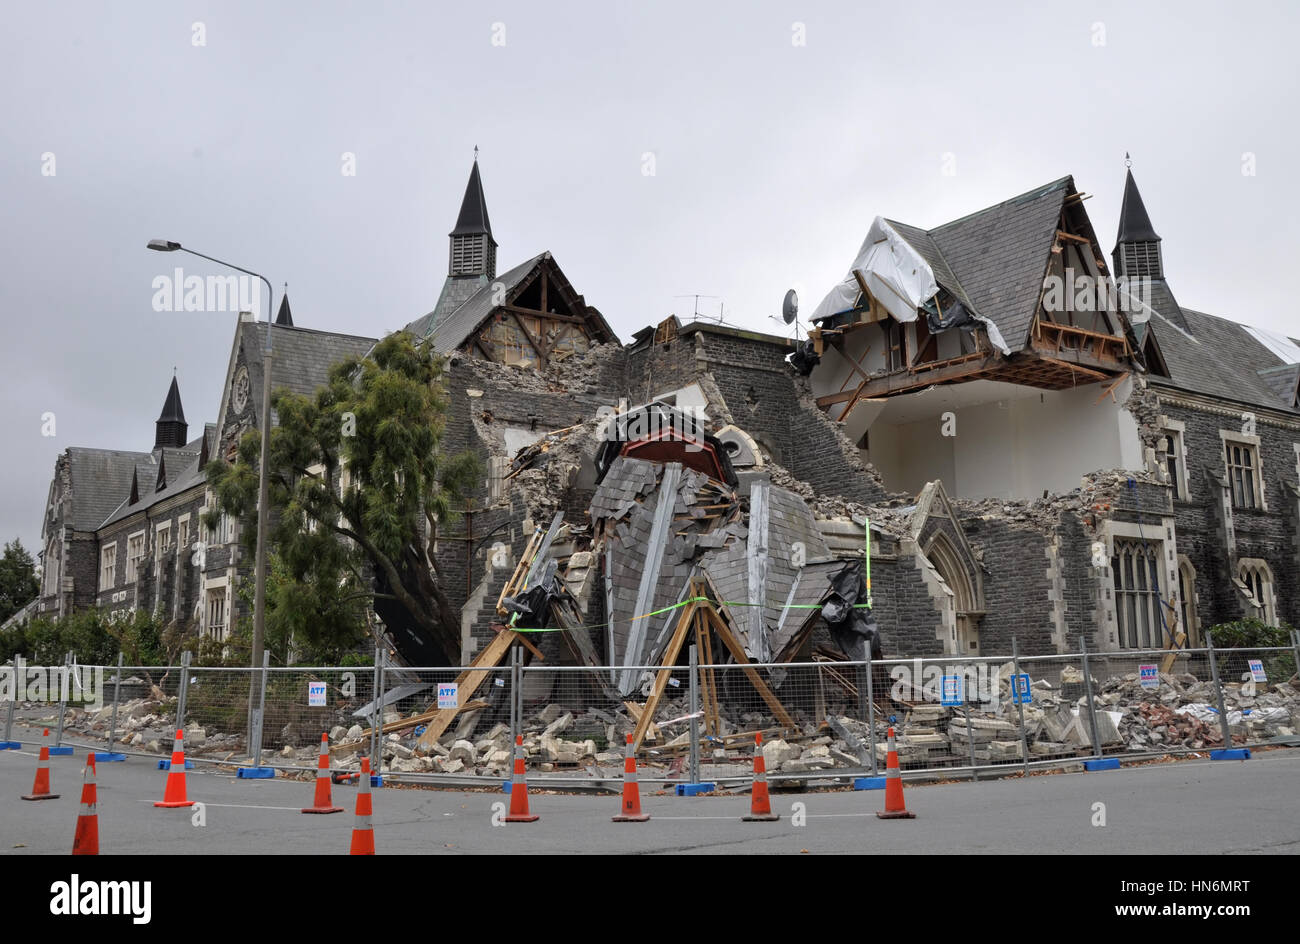 Christchurch, New Zealand - March 12, 2011: The old Normal School Building on the corner of Montreal and Kilmore streets collapses. The building was b Stock Photo